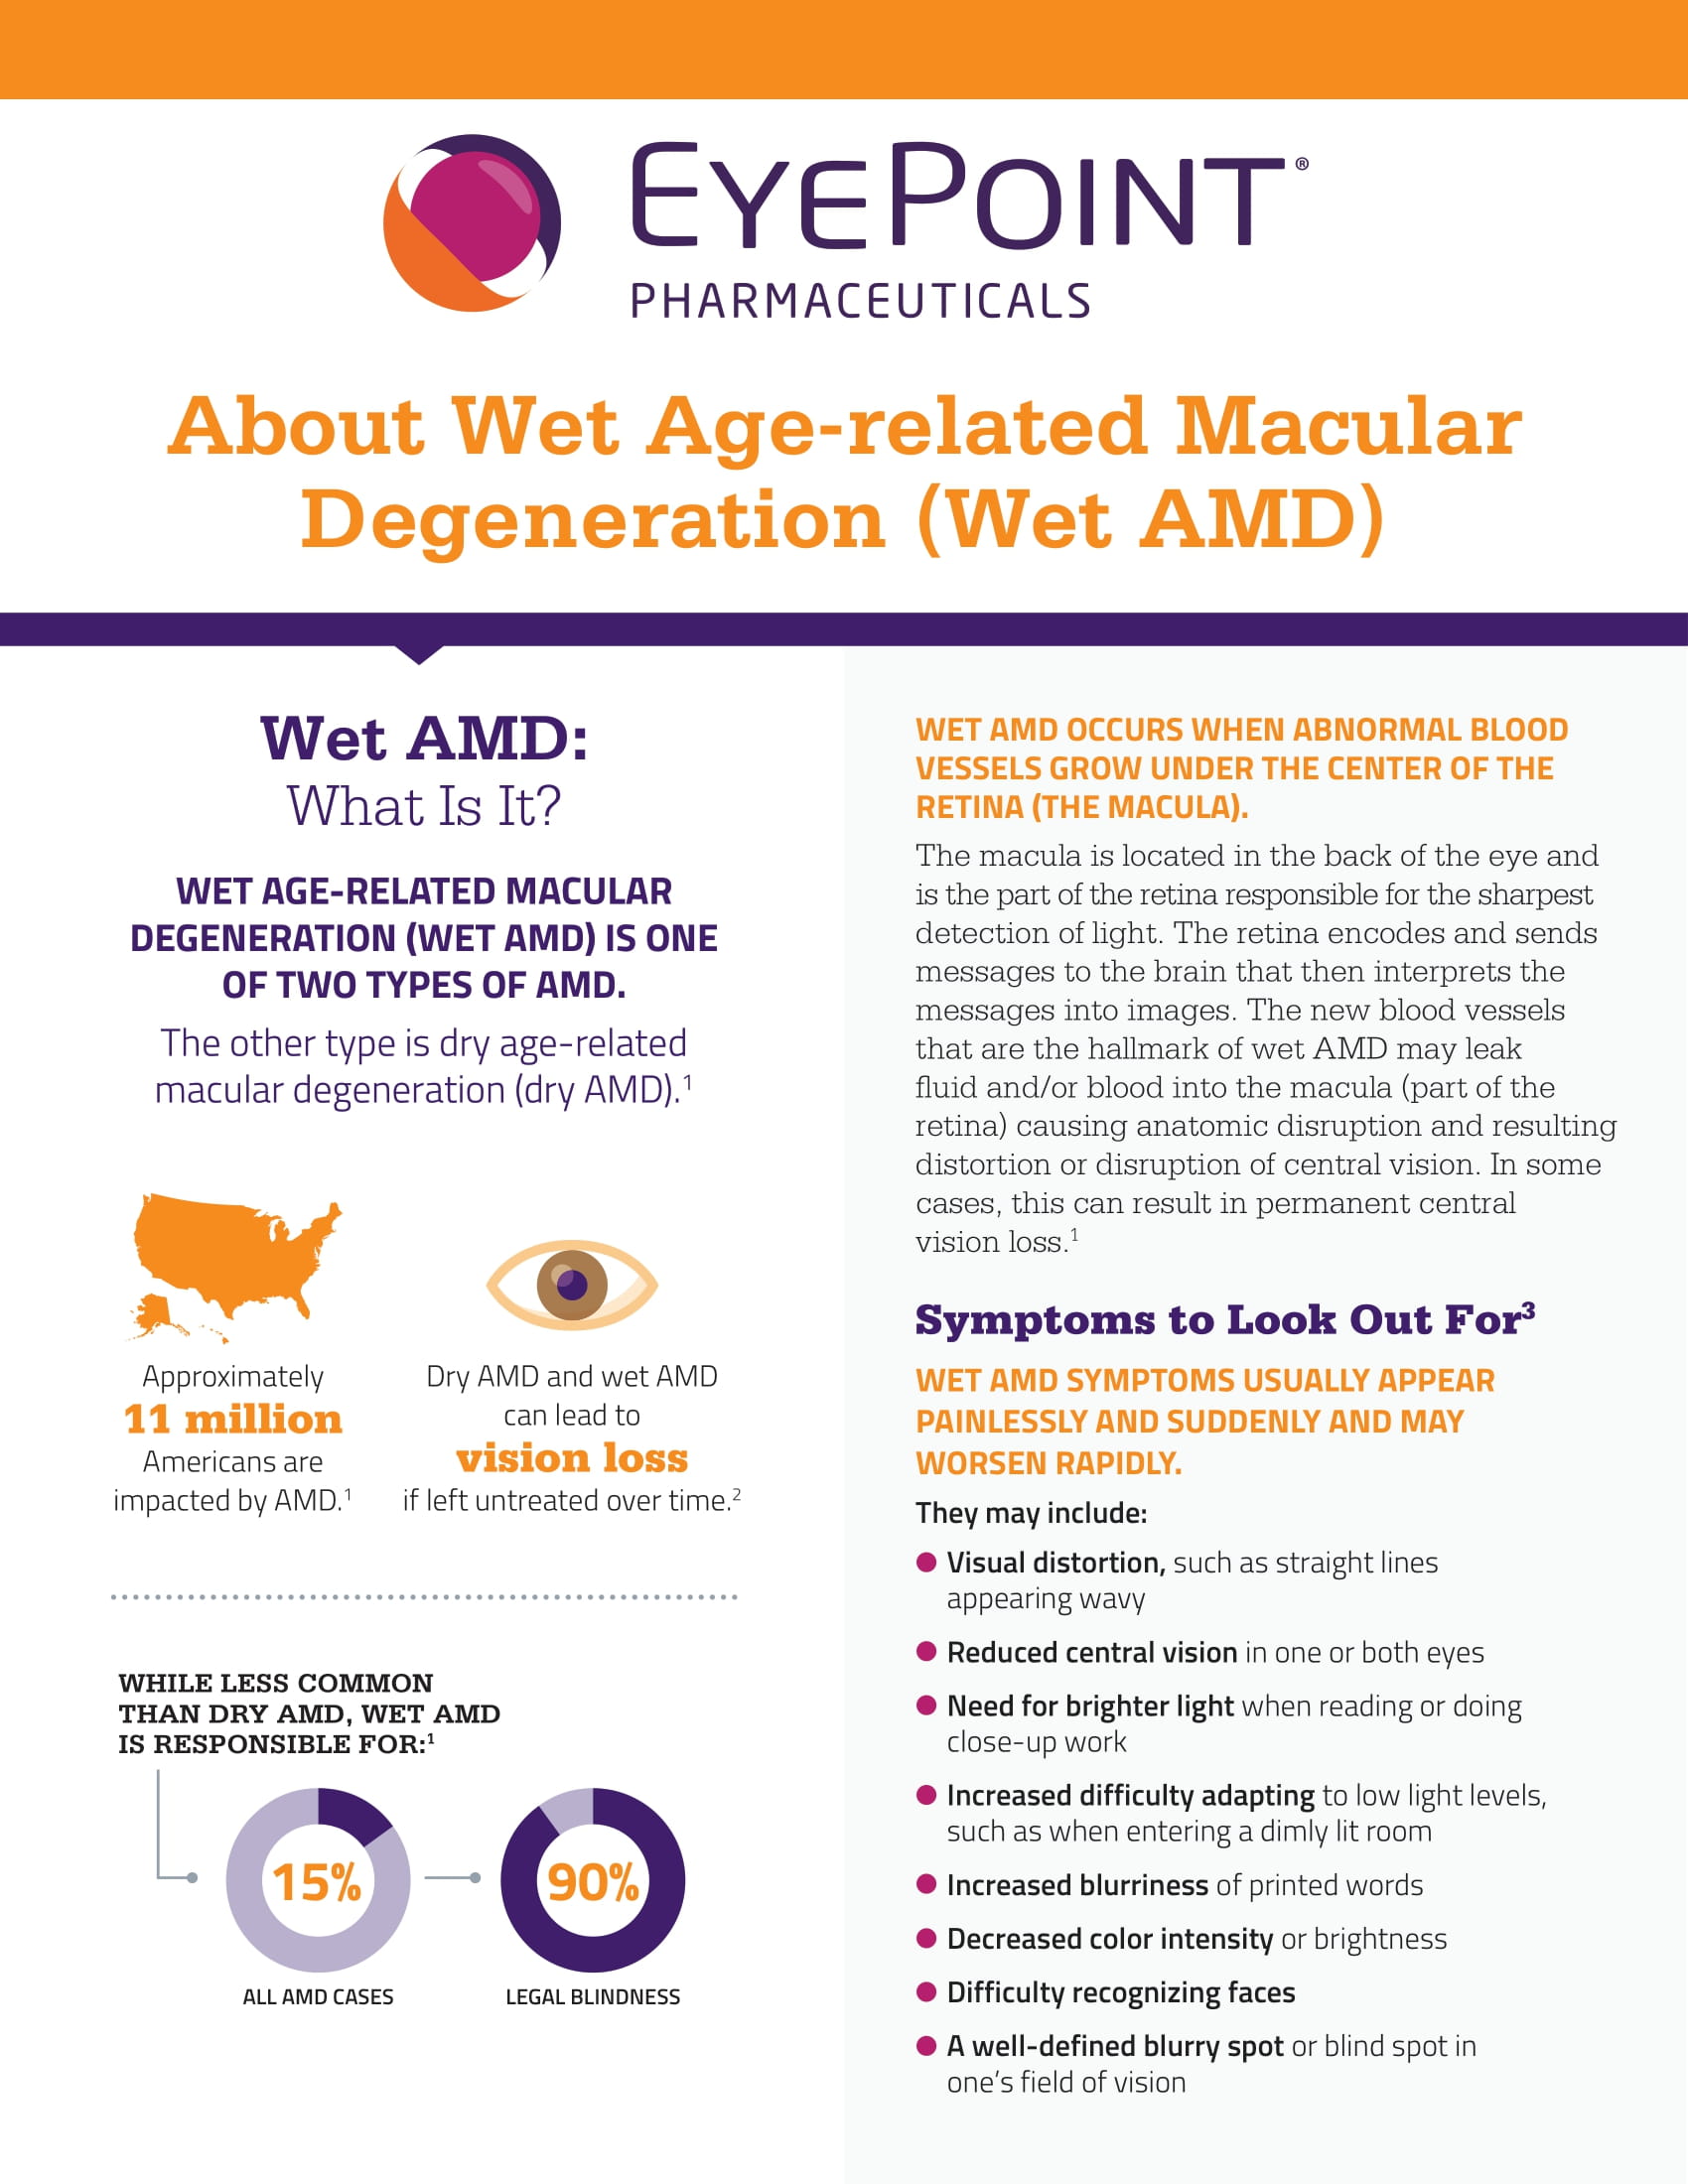 Learn more about wet AMD